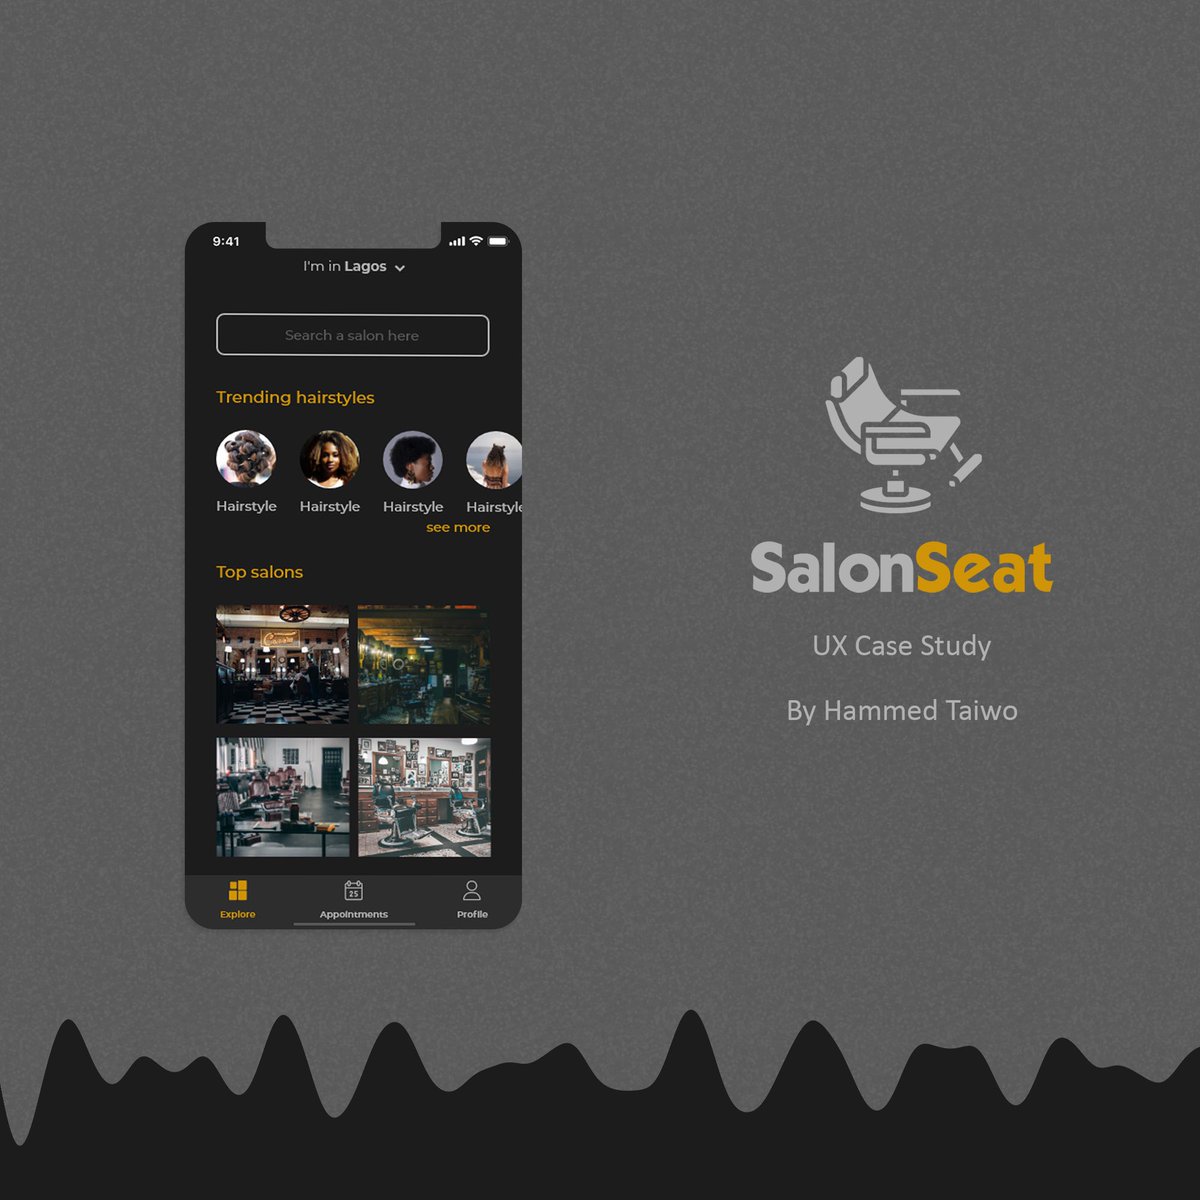 Here is a UX Case Study thread for an online barbershop app SalonSeat. The tools used were  @AdobeXD and  @Photoshop.. let’s get started